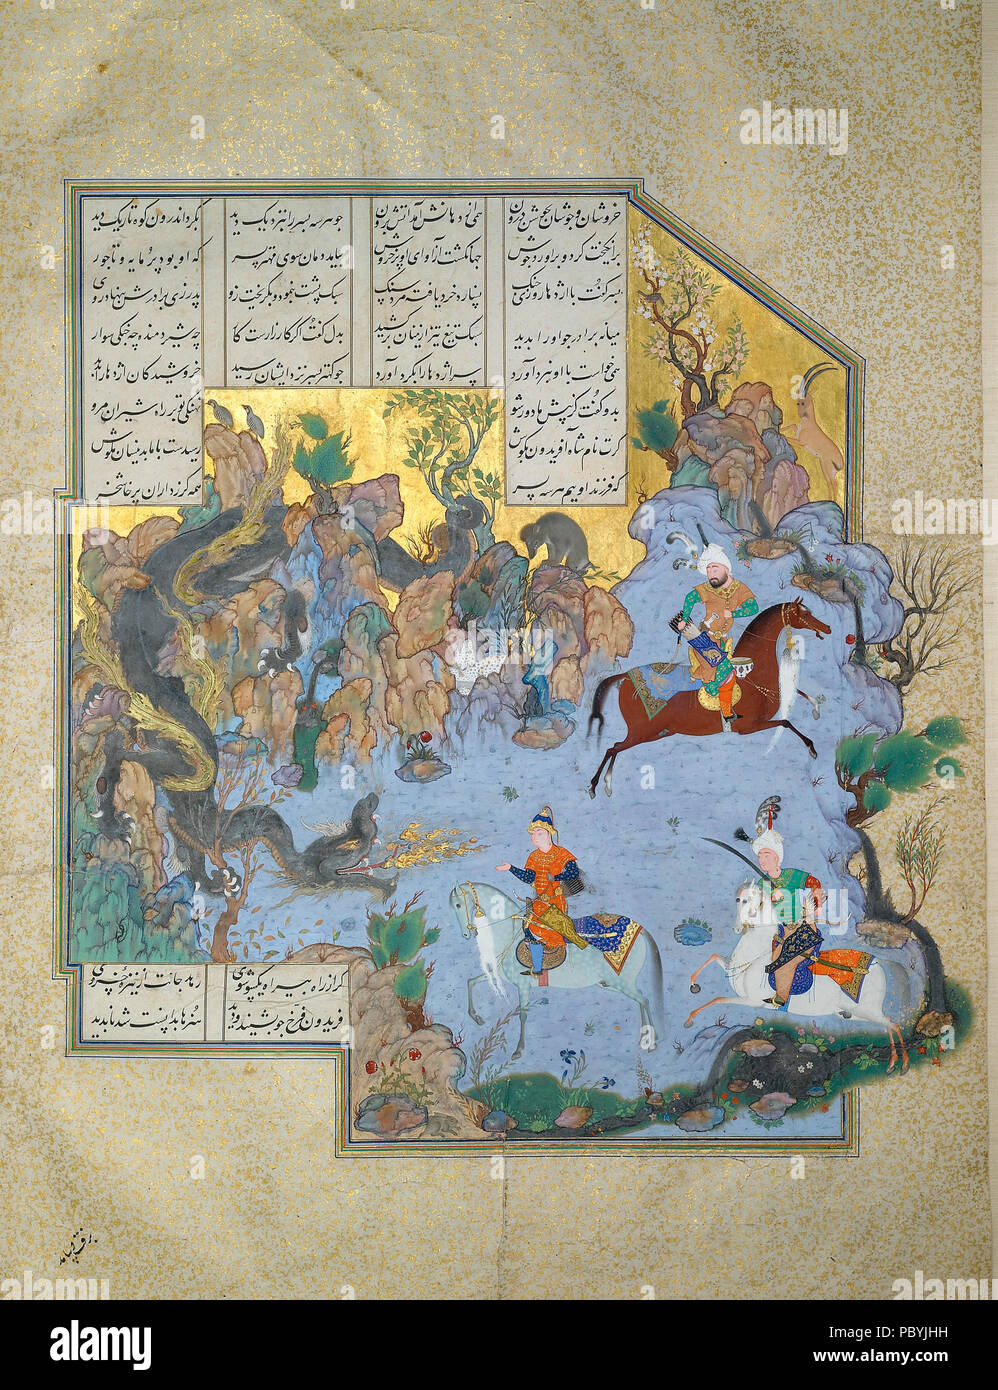 212 FOLIO FROM THE SHAHNAMEH OF SHAH TAHMASP, ATTRIBUTED TO AQA MIRAK, CIRCA 1525-35, Sotheby,s Stock Photo